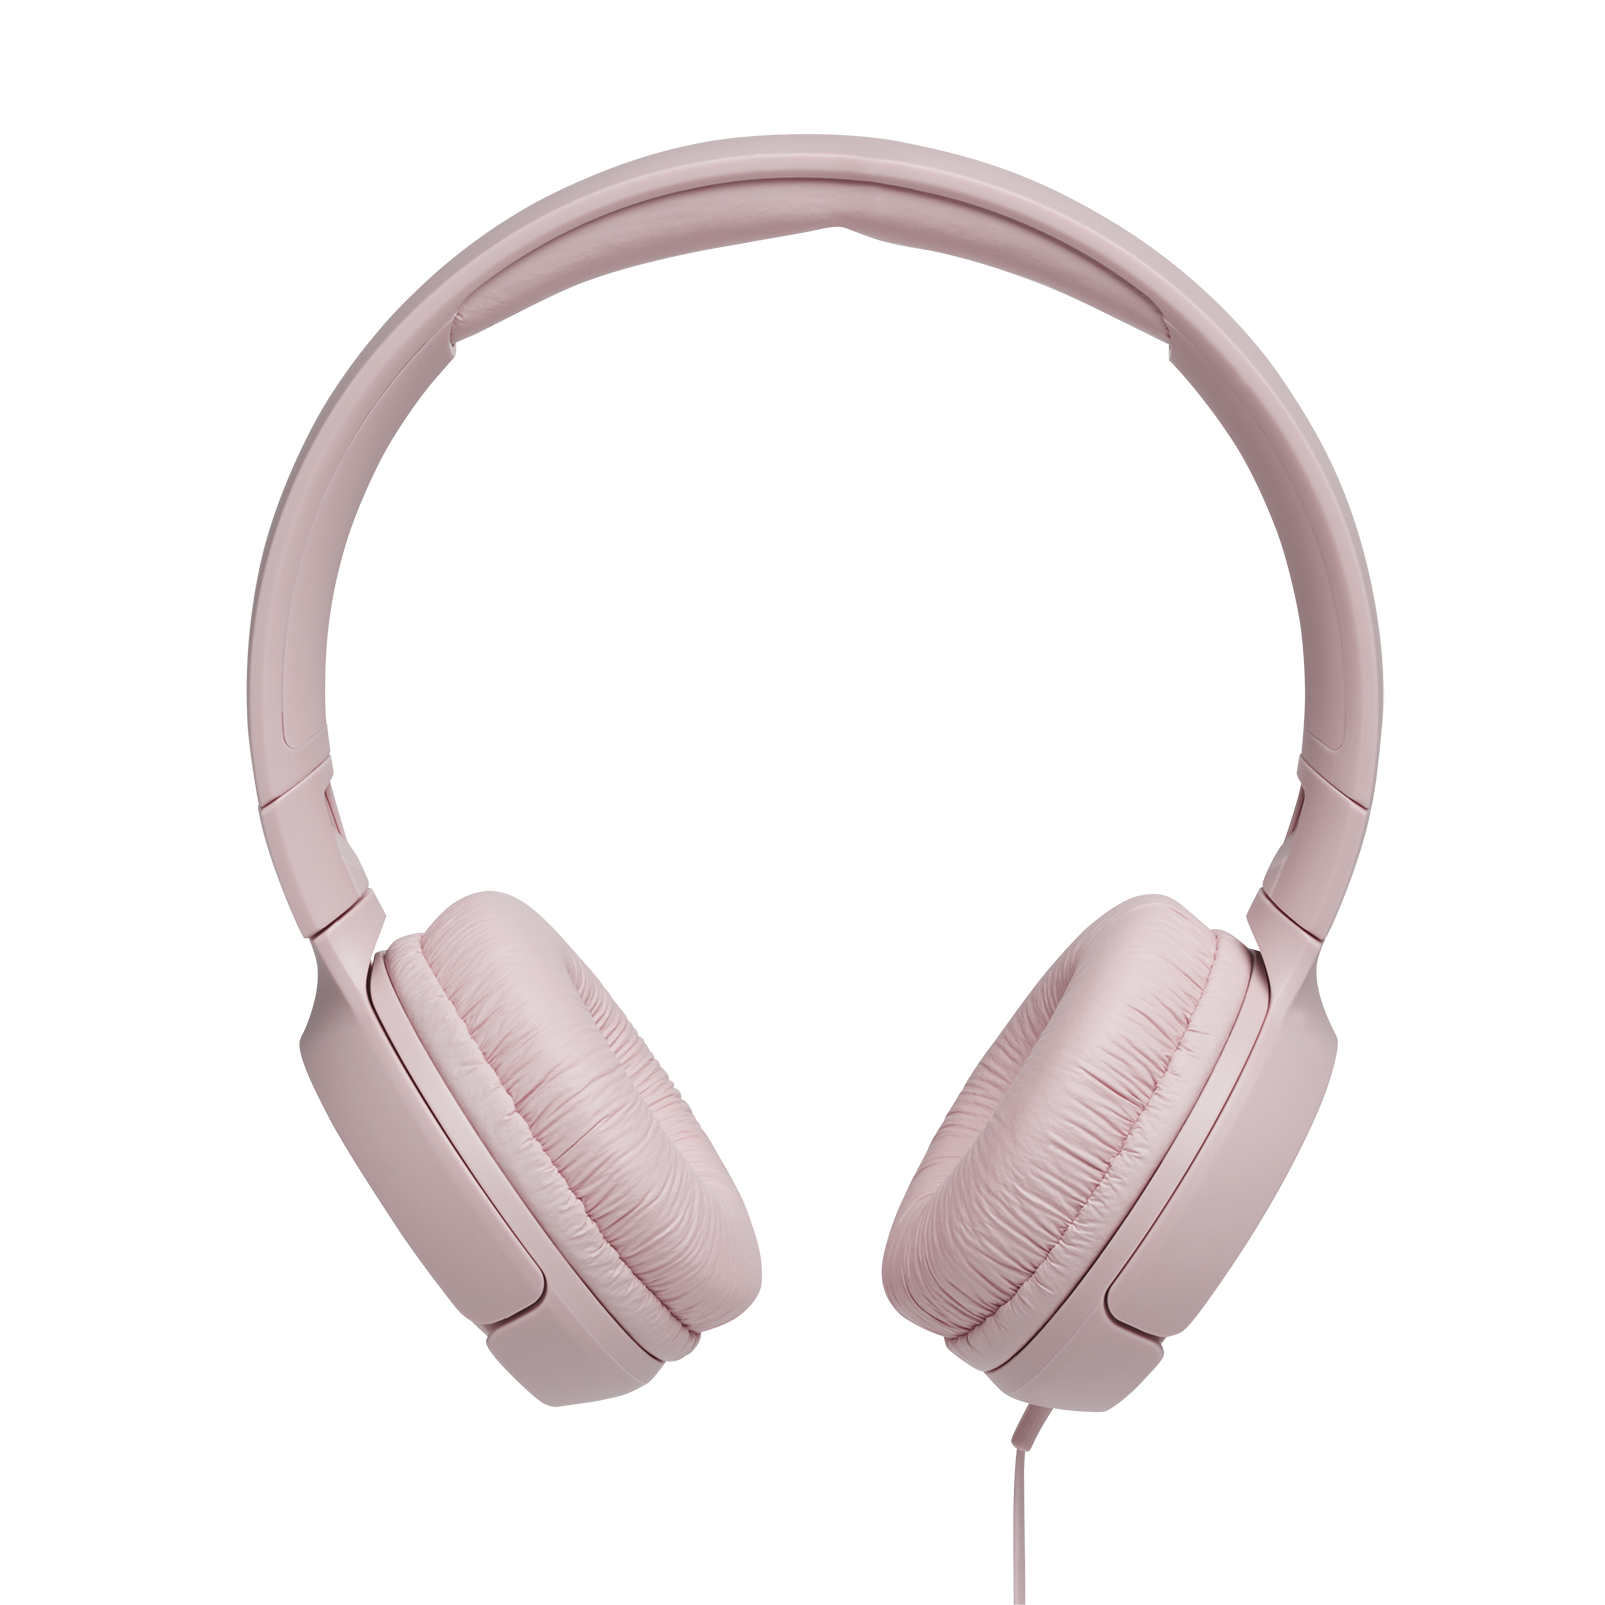 JBL Tune 500 - Pink - Wired on-ear headphones - Front